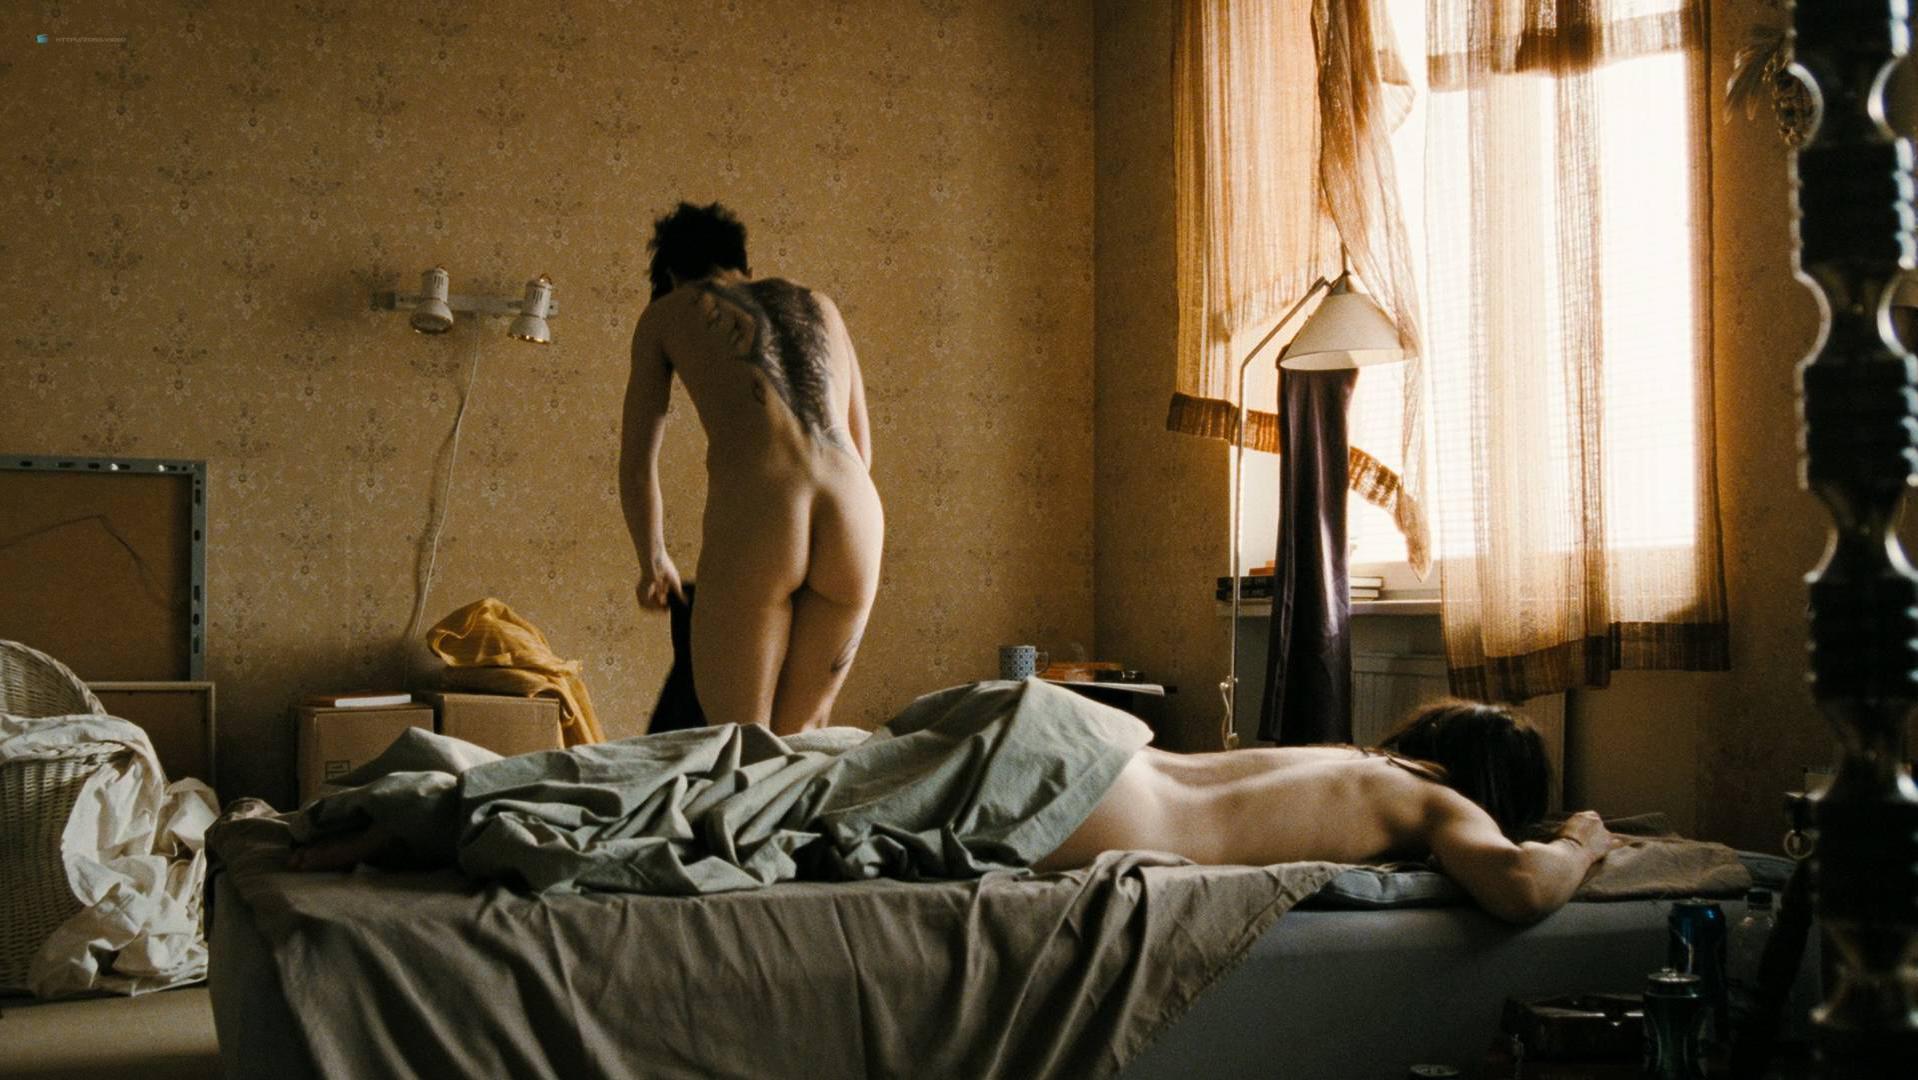 Noomi Rapace nude, Lena Endre nude - The Girl with the Dragon Tattoo (2009)